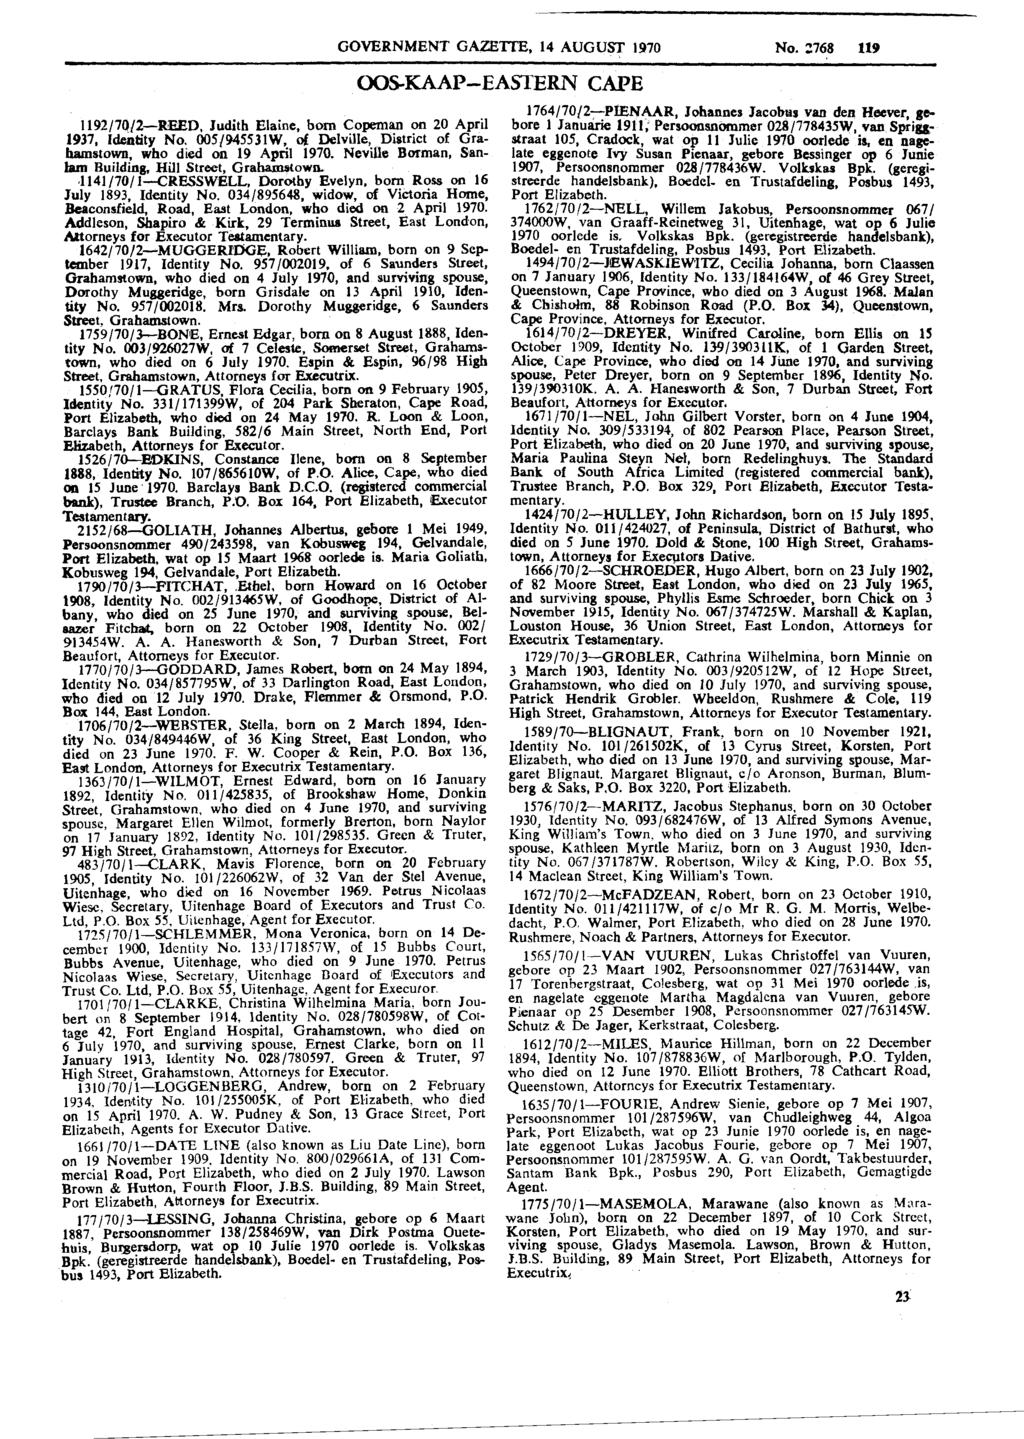 GOVERNMENT GAZETTE, 14 AUGUST 1970 No. 2768 119 OOS-KAAP-EASTERN CAPE 1192/7Q/2-REED, Judith Elaine, born Copeman on 20 April 1937, Identity No. 005/945531W, of Delville, District of Grahamstown, who.